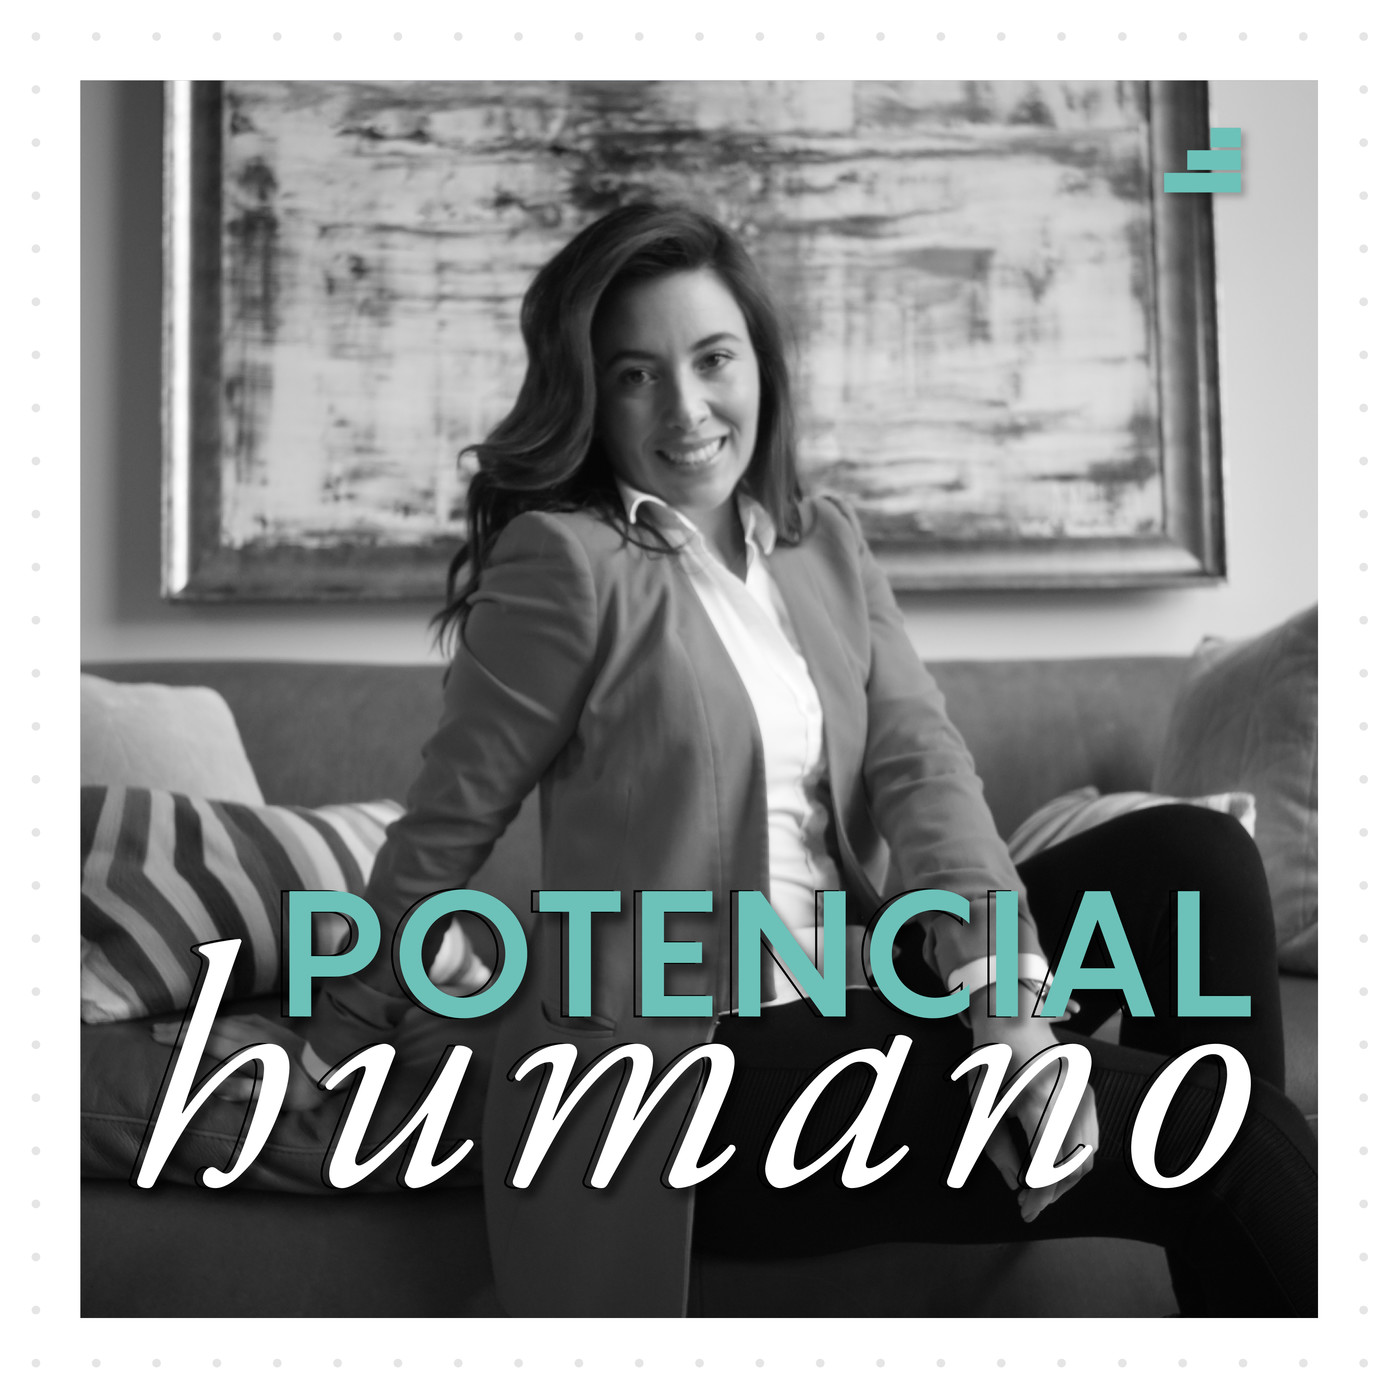 POTENCIAL HUMANO by PAMELA GUADALUPE